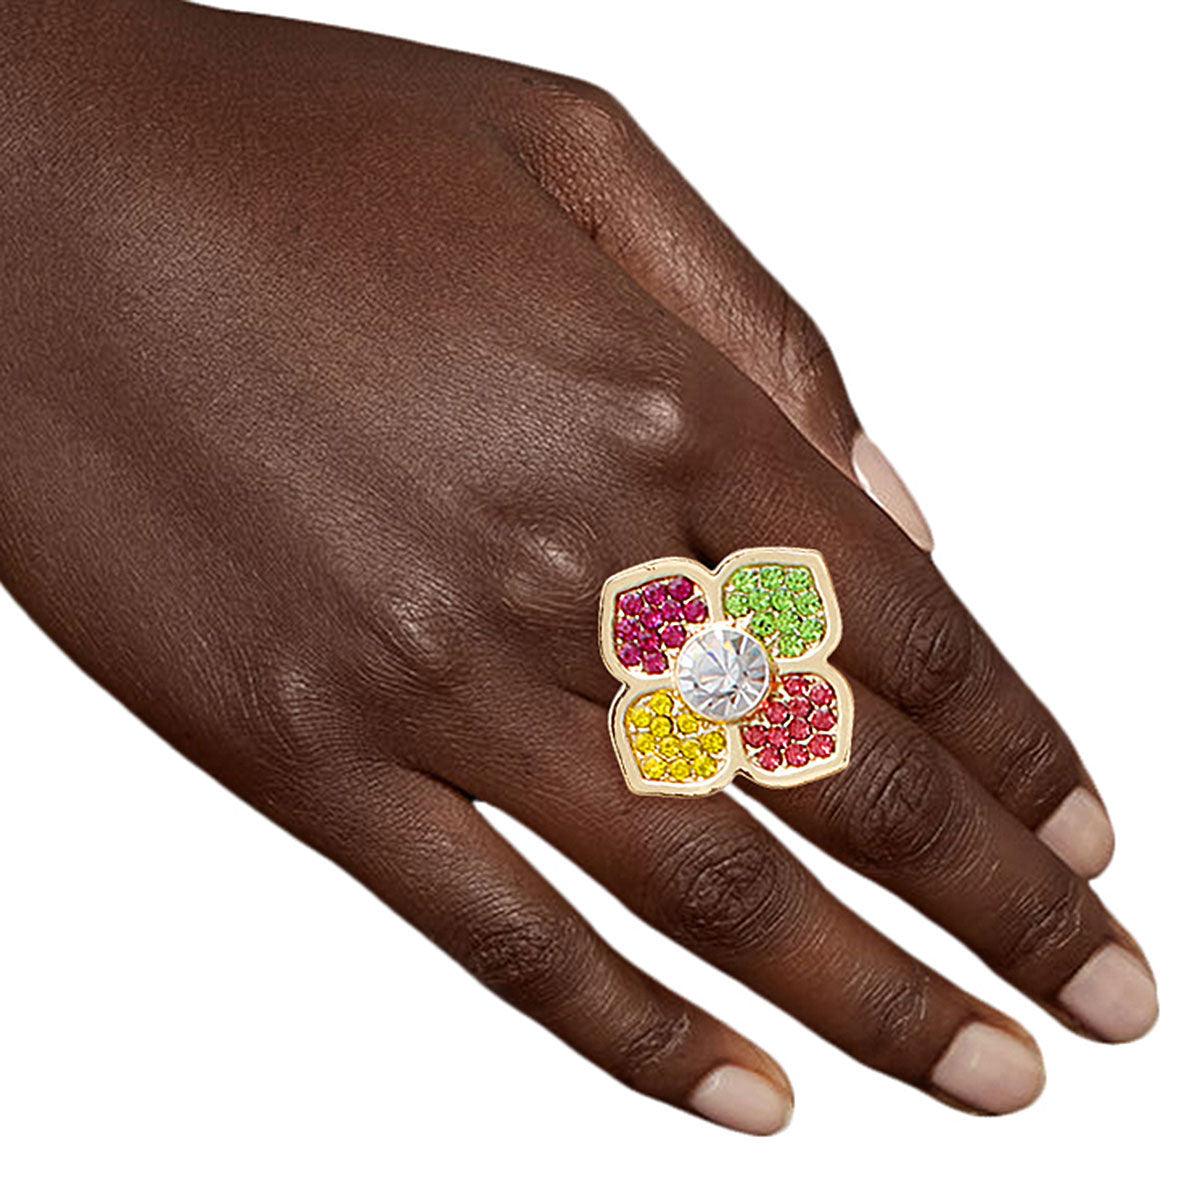 Radiant Petals: Women's Gold Flower Ring with Multicolor Rhinestones - Fashion Jewelry